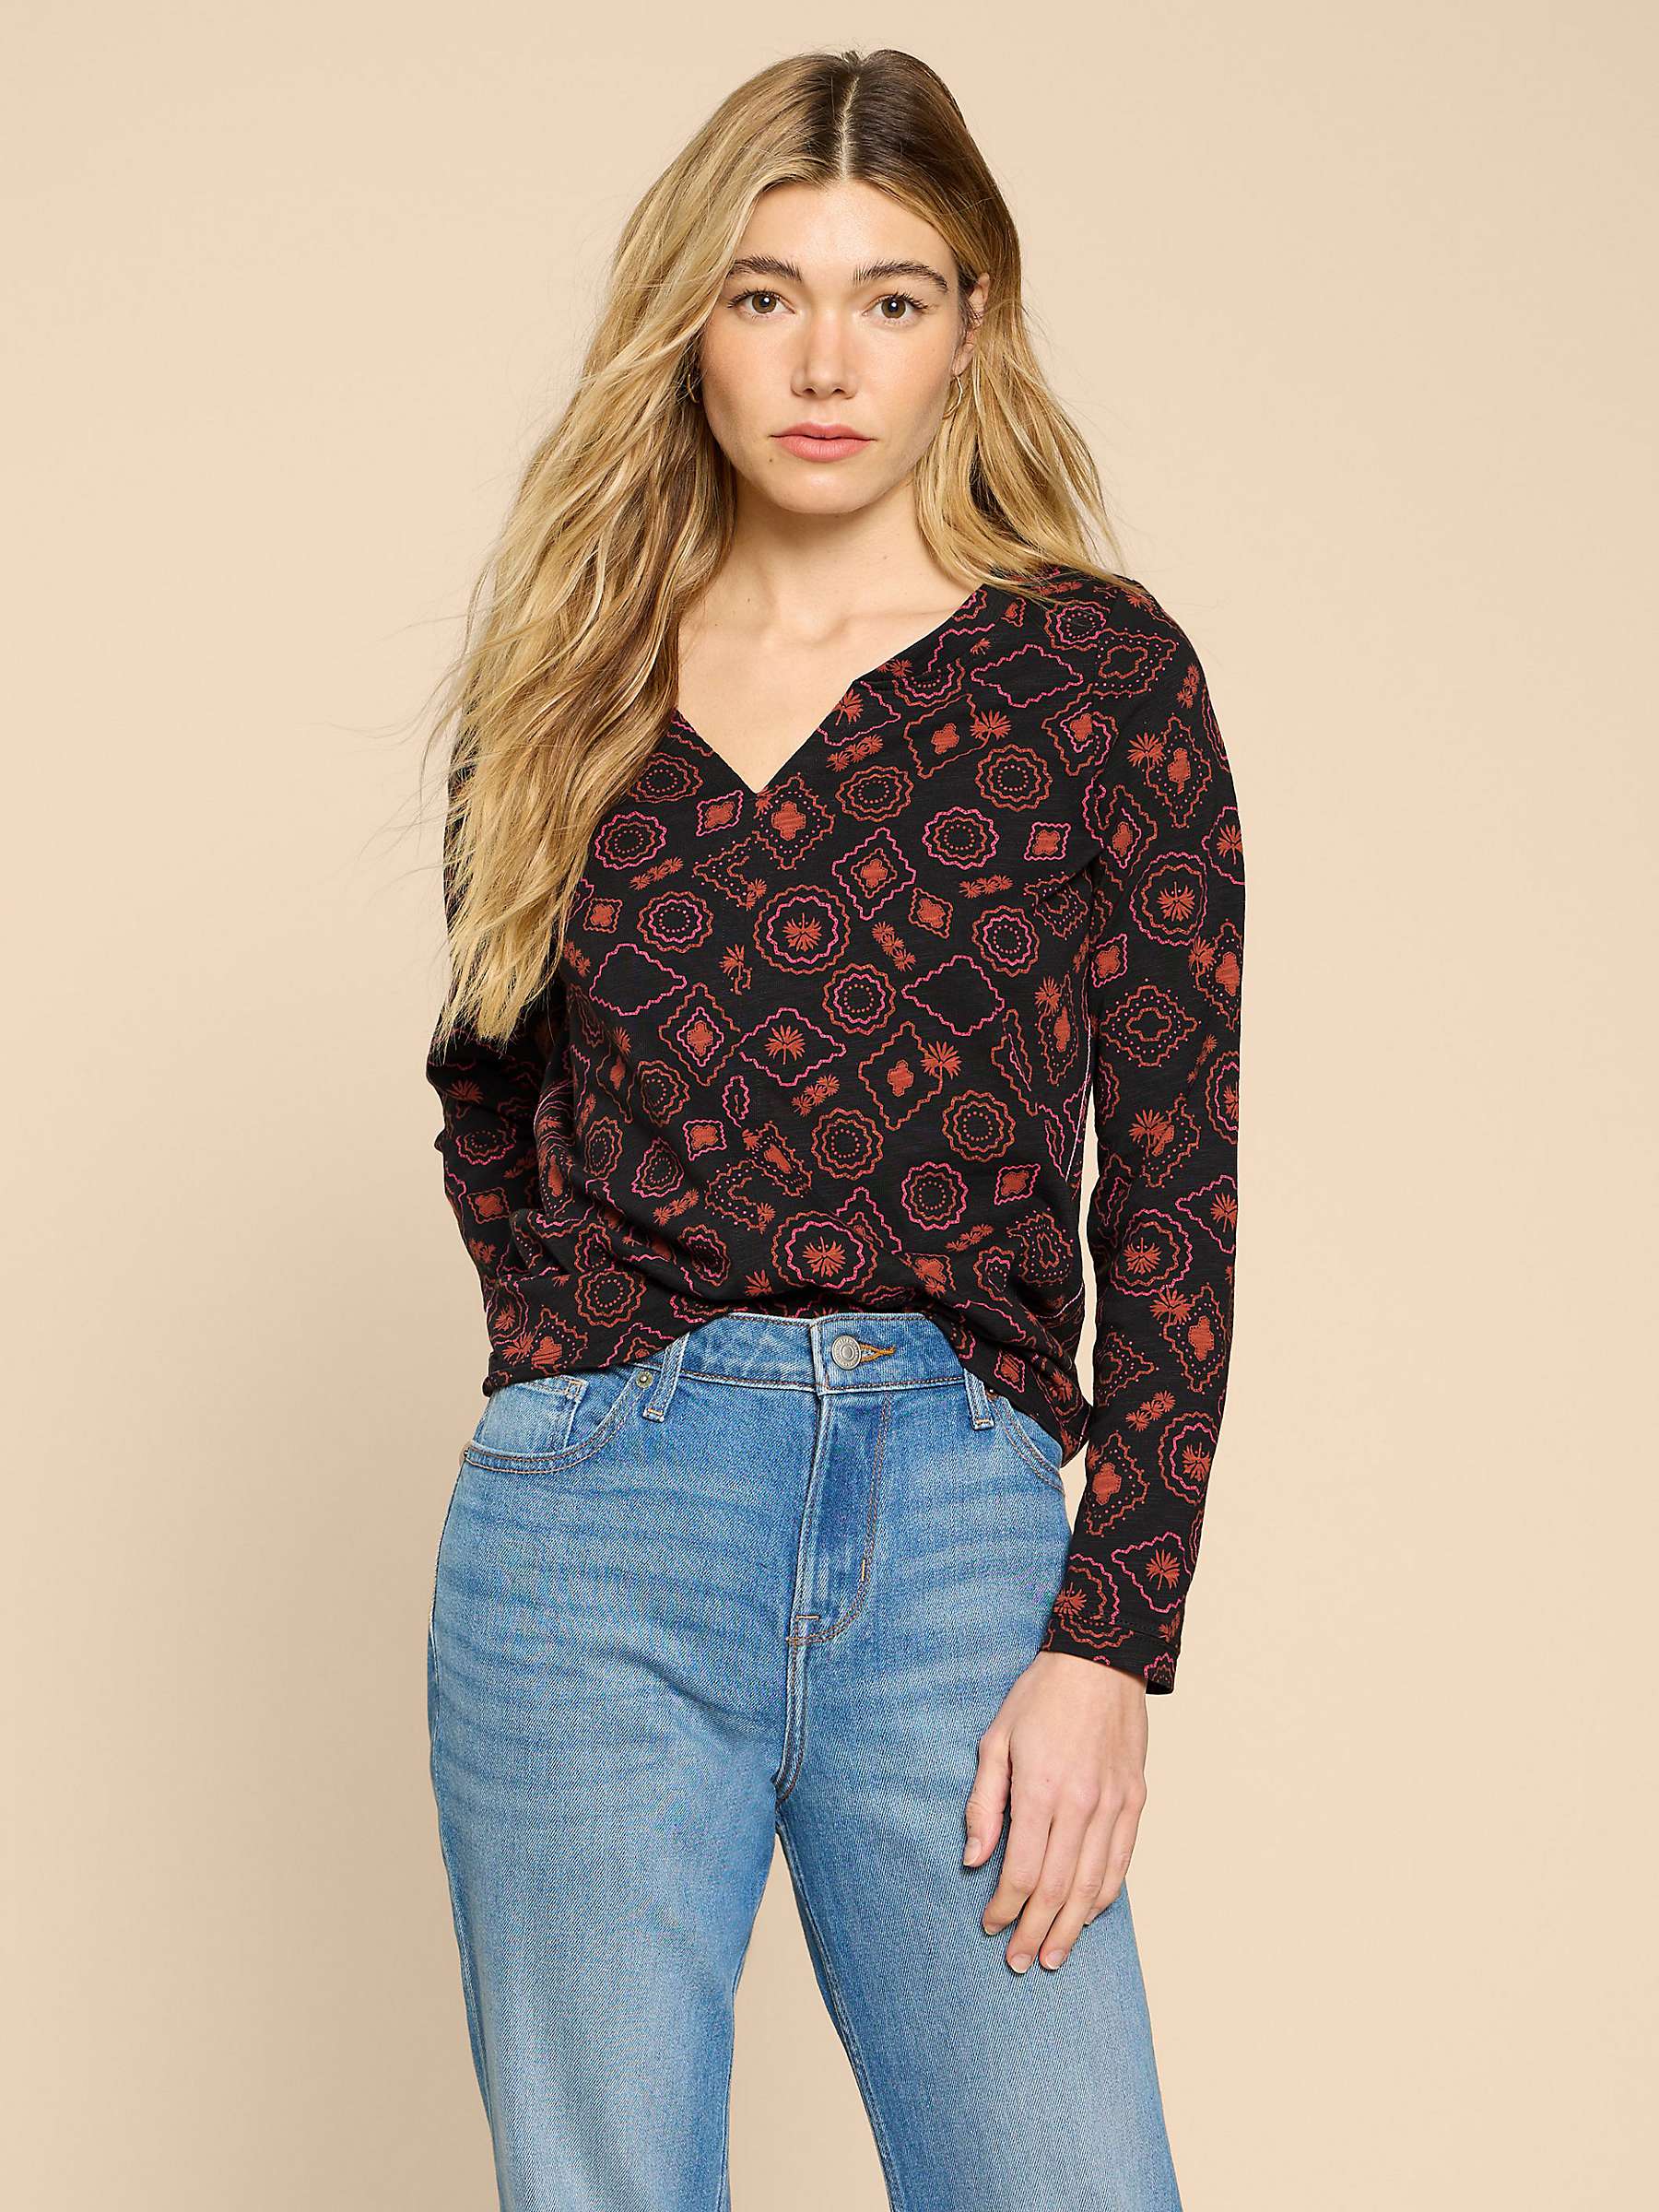 Buy White Stuff Nelly Graphic Print Long Sleeve Cotton T-Shirt, Black/Multi Online at johnlewis.com